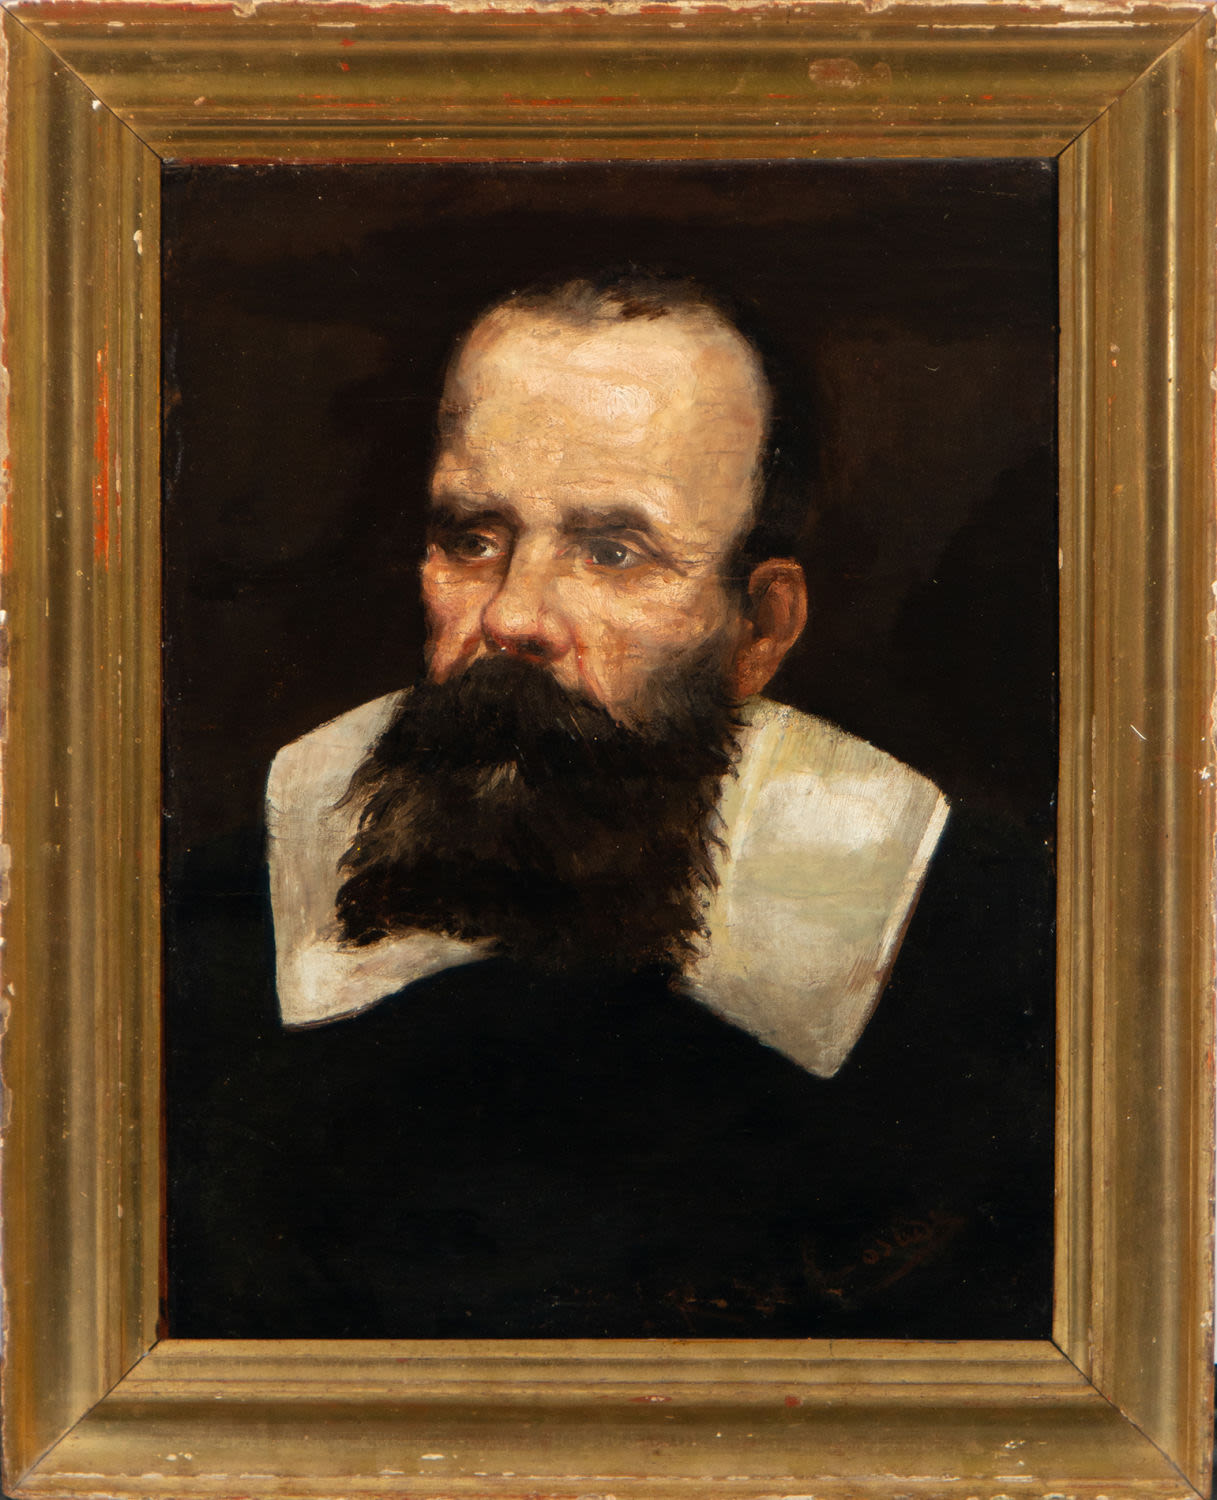 Portrait of a Gentleman with a Beard, Spanish school from the second half of the 19th century